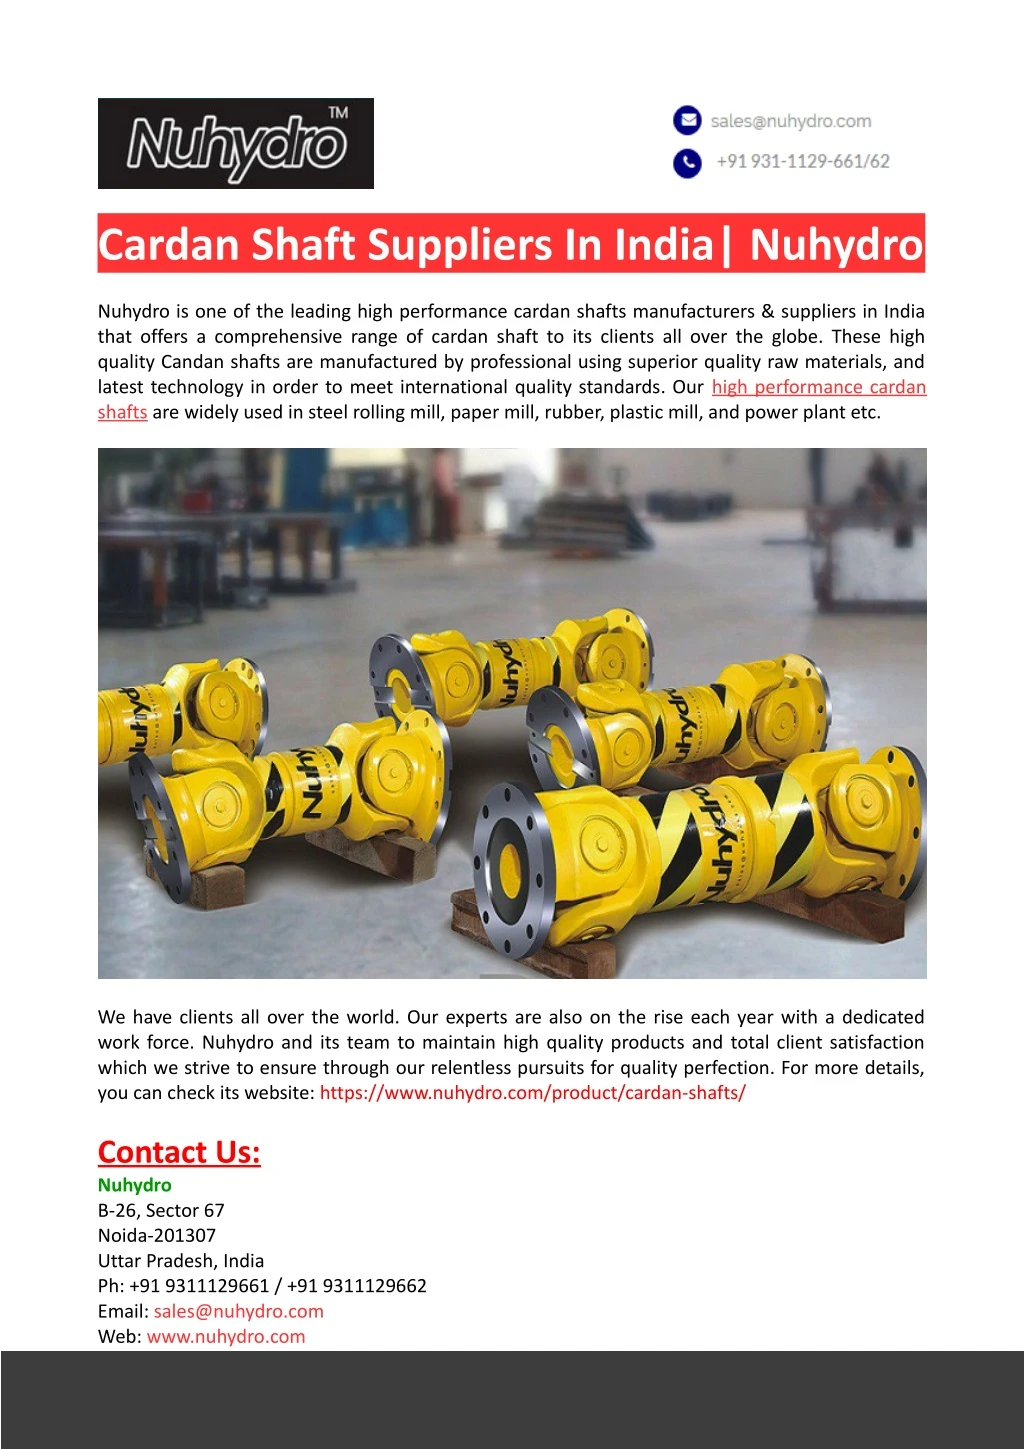 cardan shaft suppliers in india nuhydro